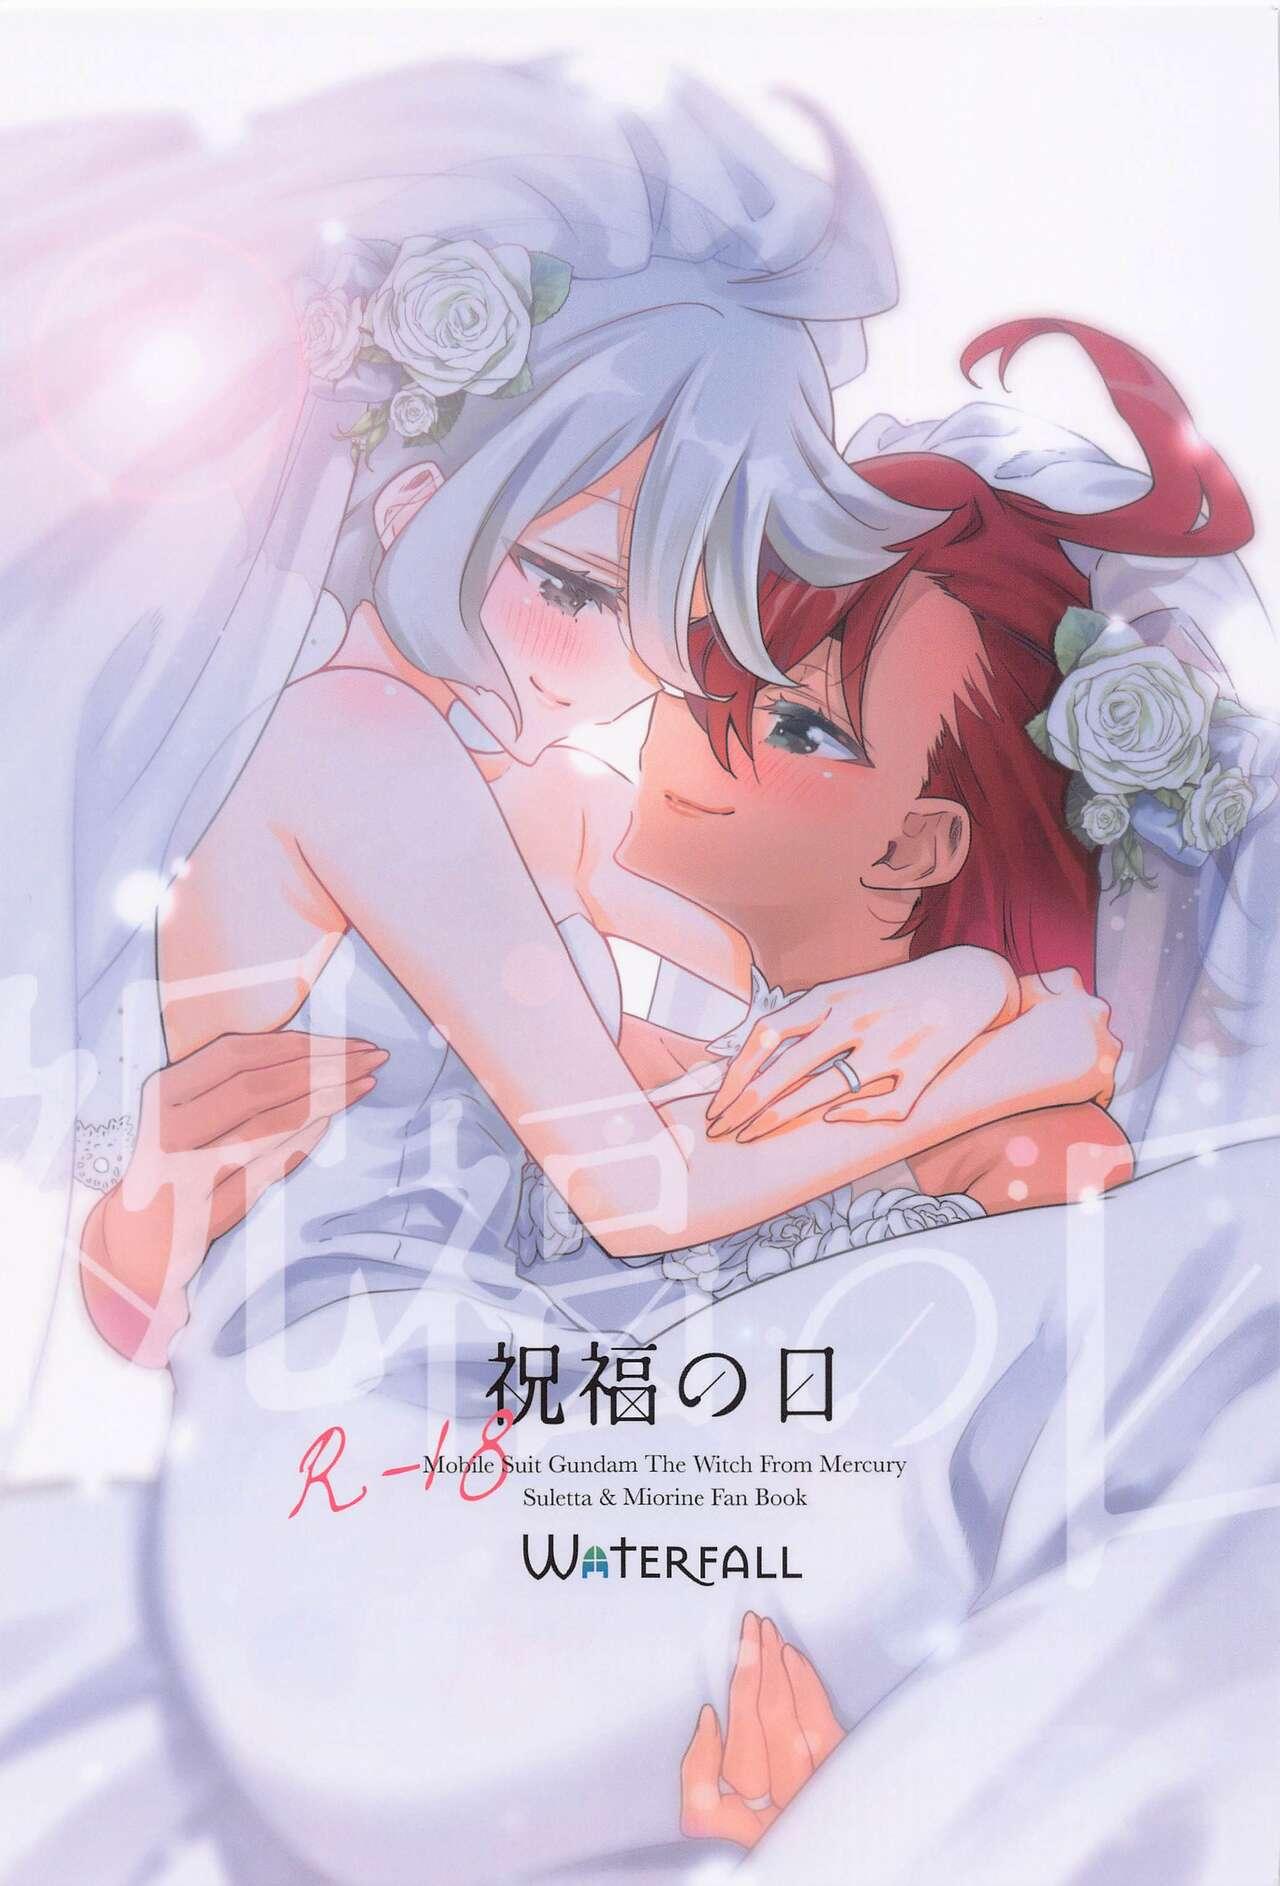 Gostosa Shukufuku no Hi | 祝福之日 - Mobile suit gundam the witch from mercury Orgasms - Page 2